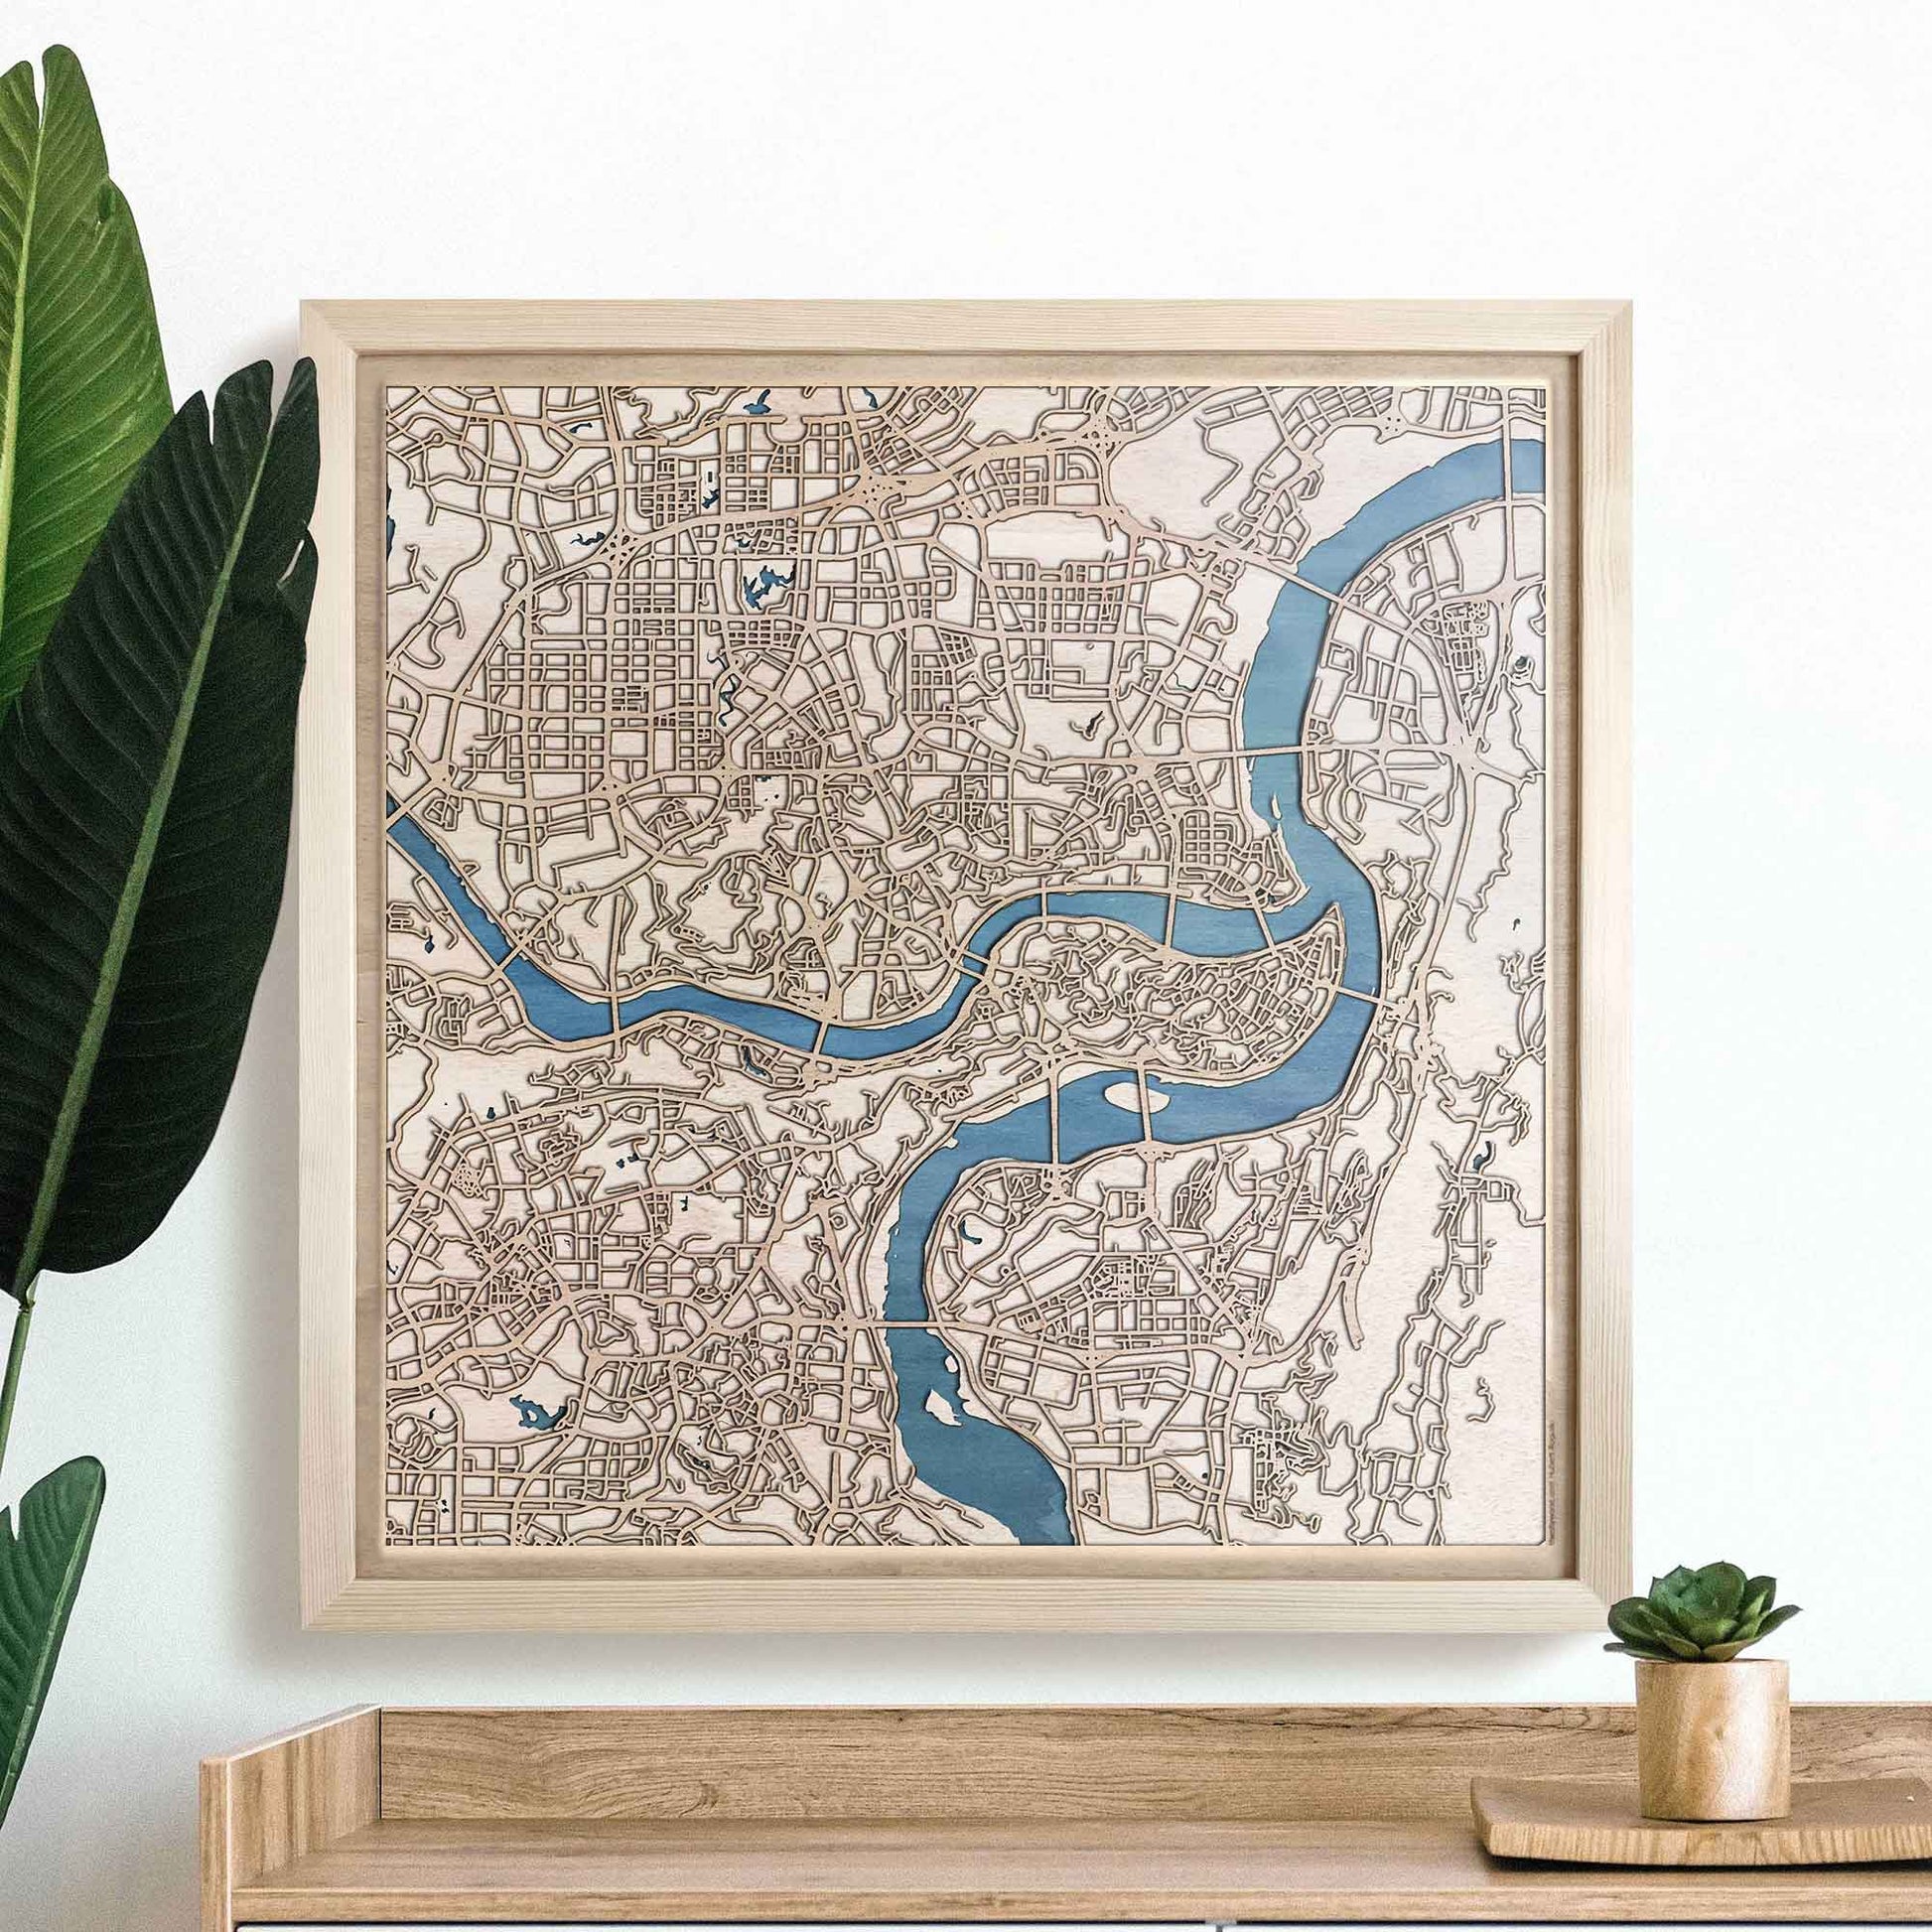 Chongqing Wooden Map by CityWood - Custom Wood Map Art - Unique Laser Cut Engraved - Anniversary Gift